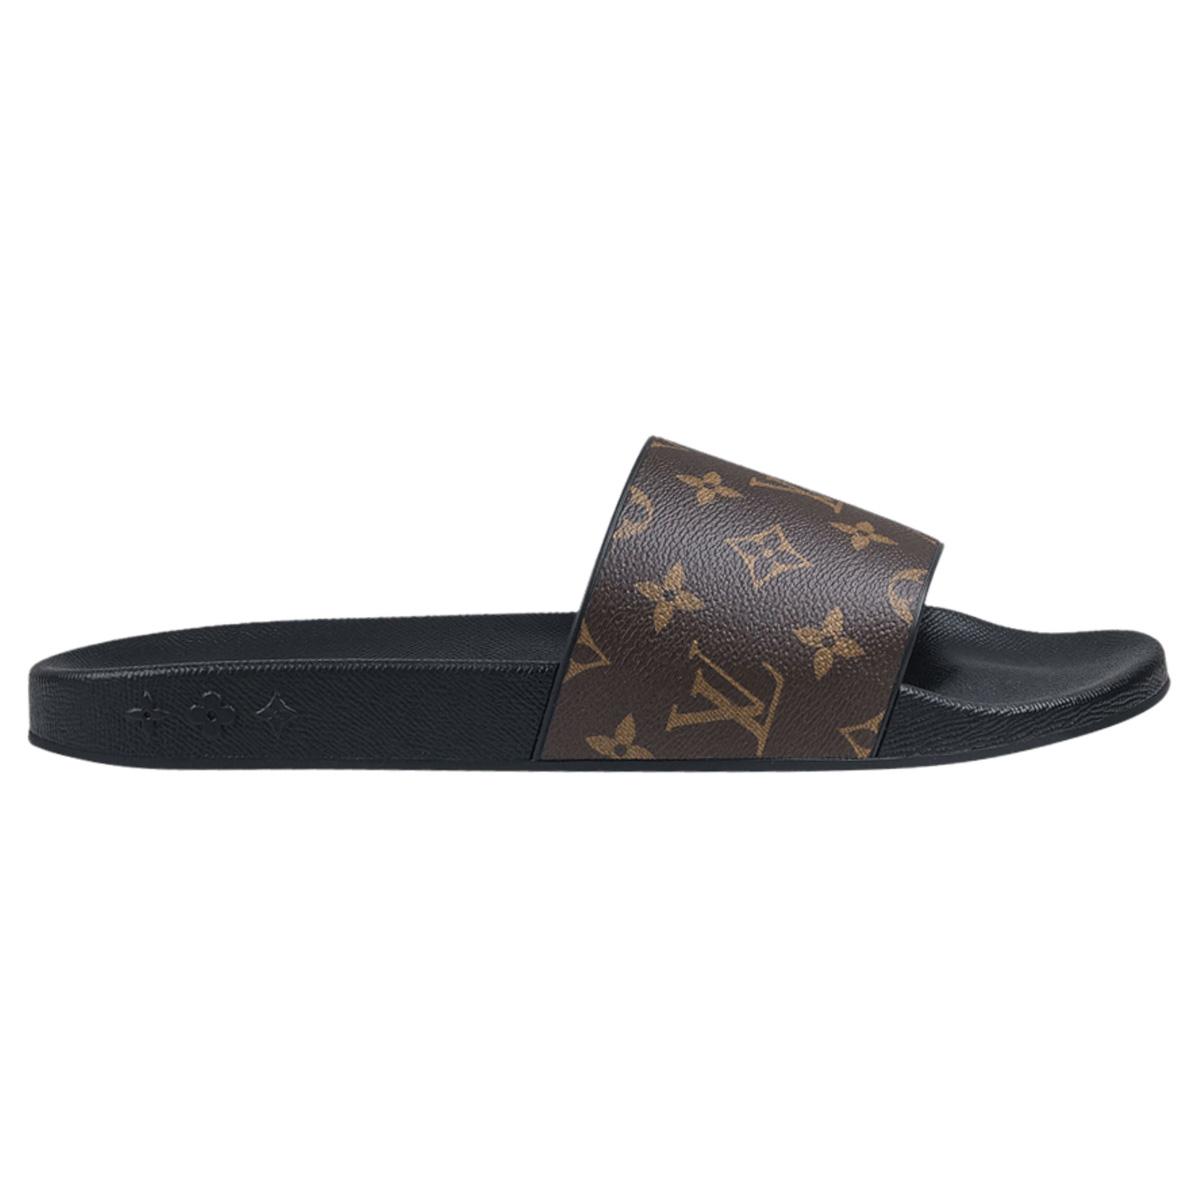 Did you know? The Louis Vuitton Oasis slides run large. Our sales team  would be happy to advice on the perfect size for you. Shop with…